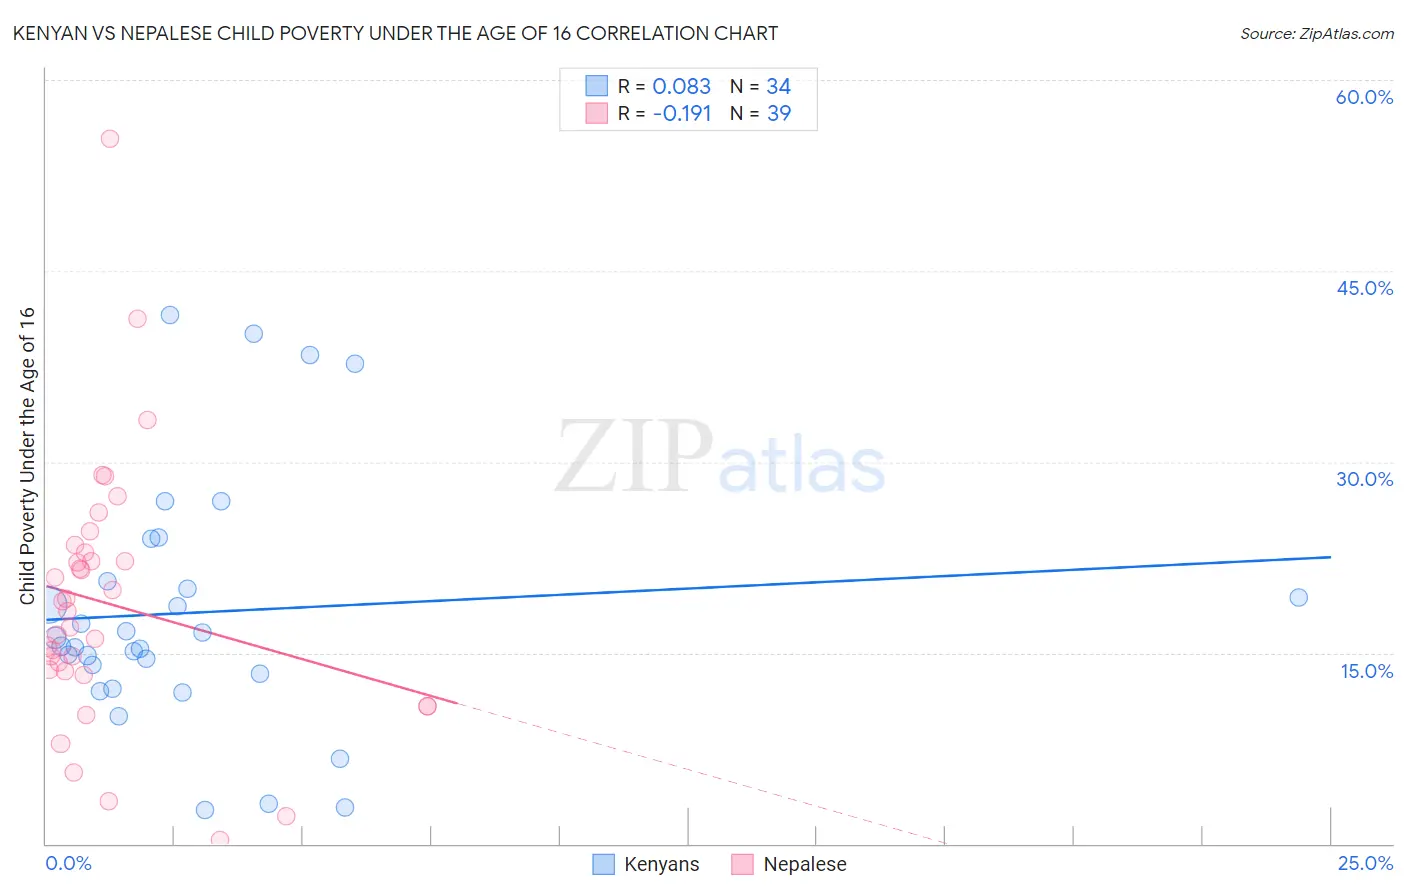 Kenyan vs Nepalese Child Poverty Under the Age of 16